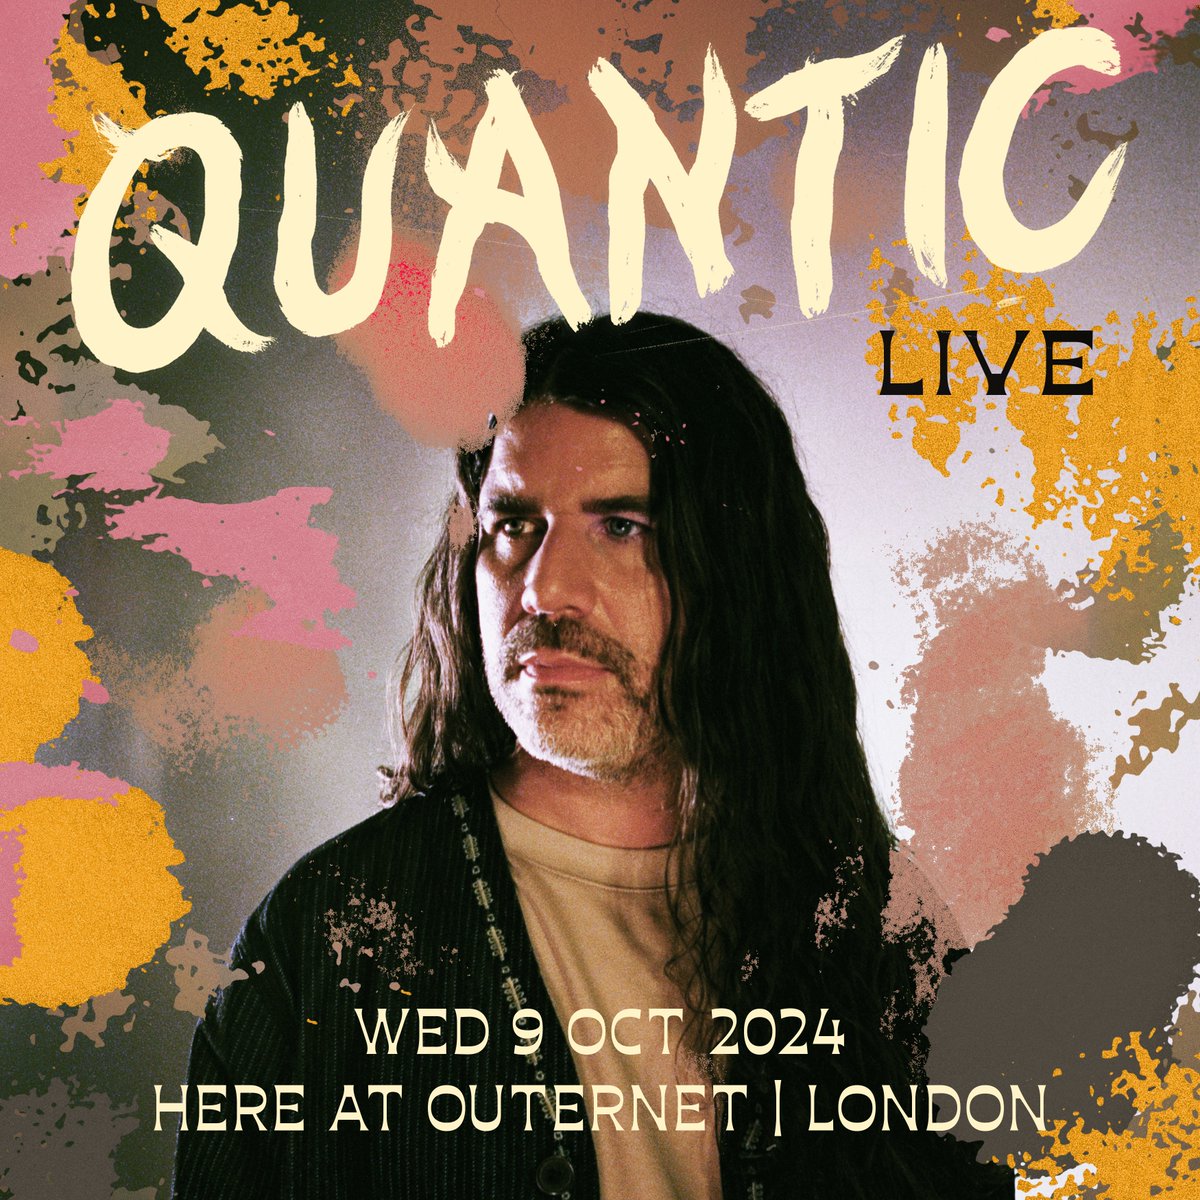 Great to get this out there finally! My headline, London, live show. This is an exciting occasion for me. I've been creating, presenting and touring live shows for many years and I want to approach this in a new way for 2024. Pre-sale sign up here! mailchi.mp/77121aa57c27/s…